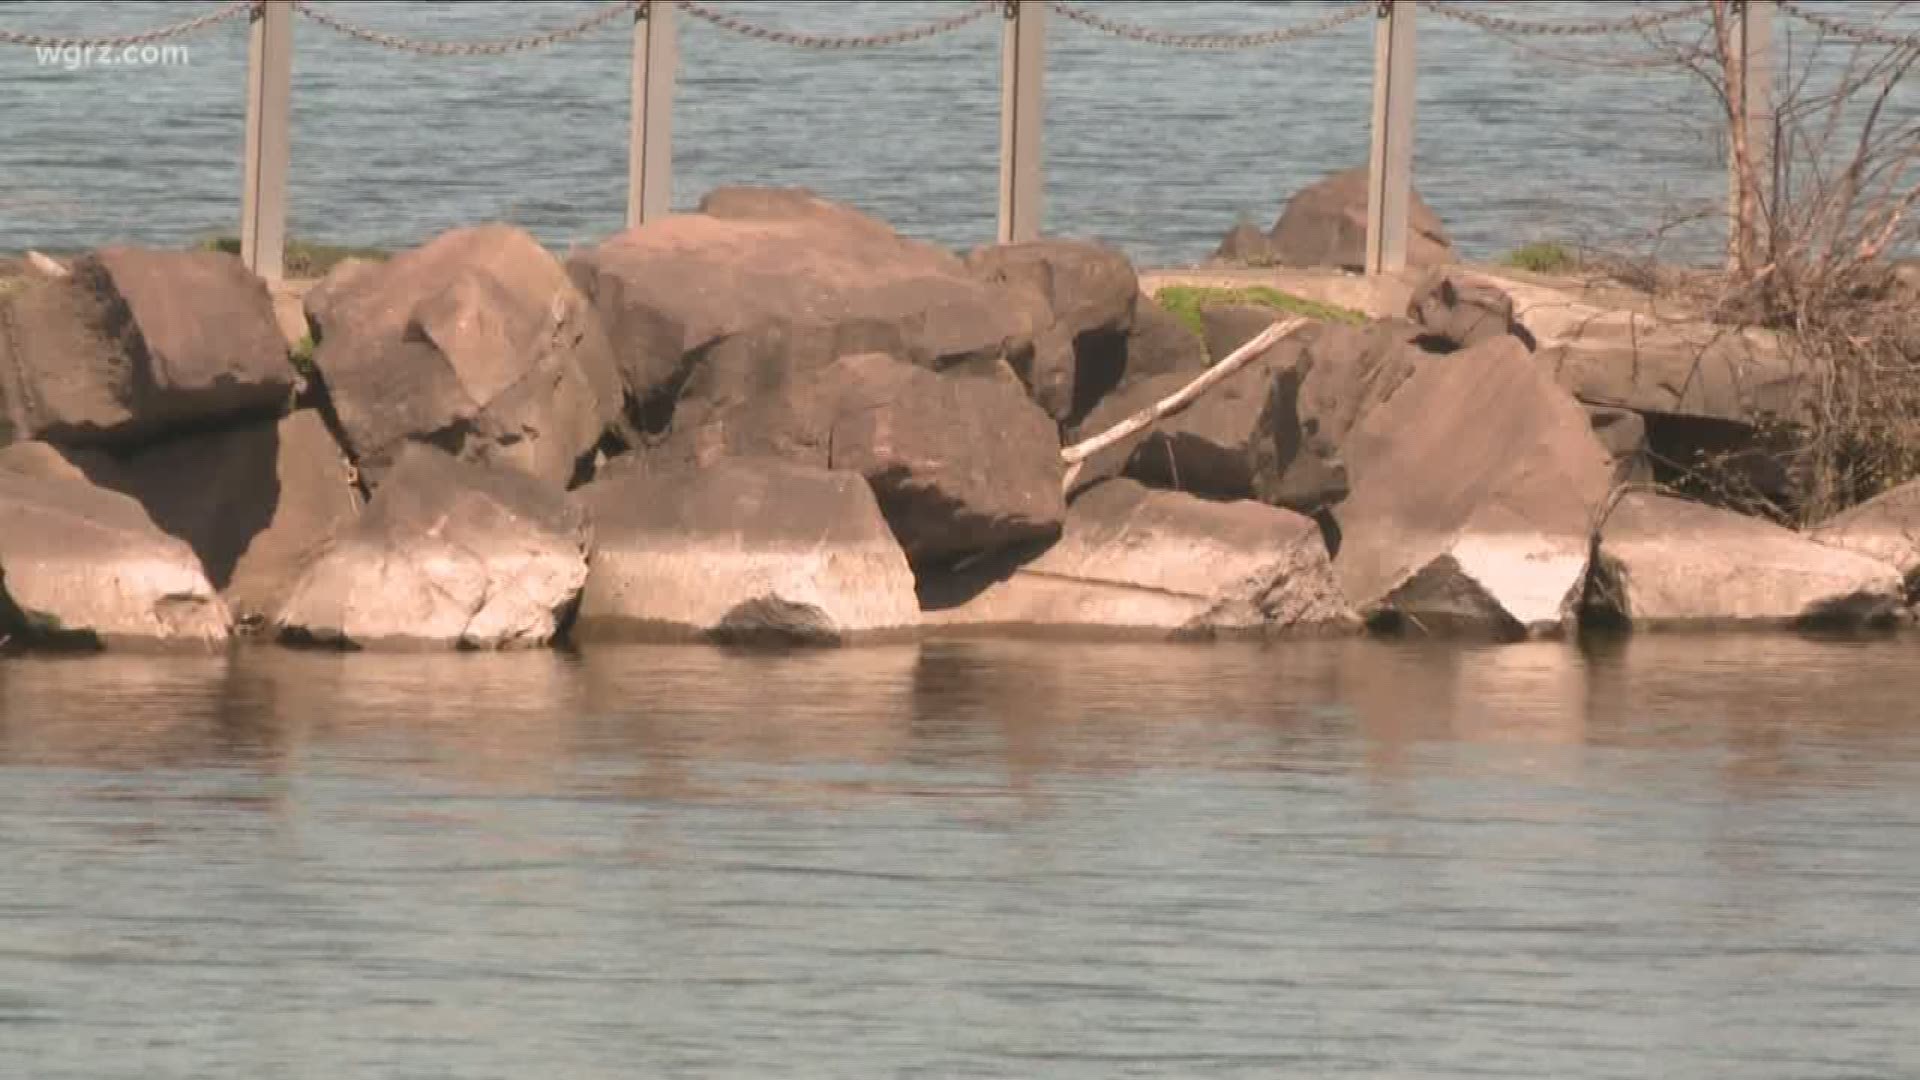 After a calm few days, lakeshore property owners worry about what could follow.